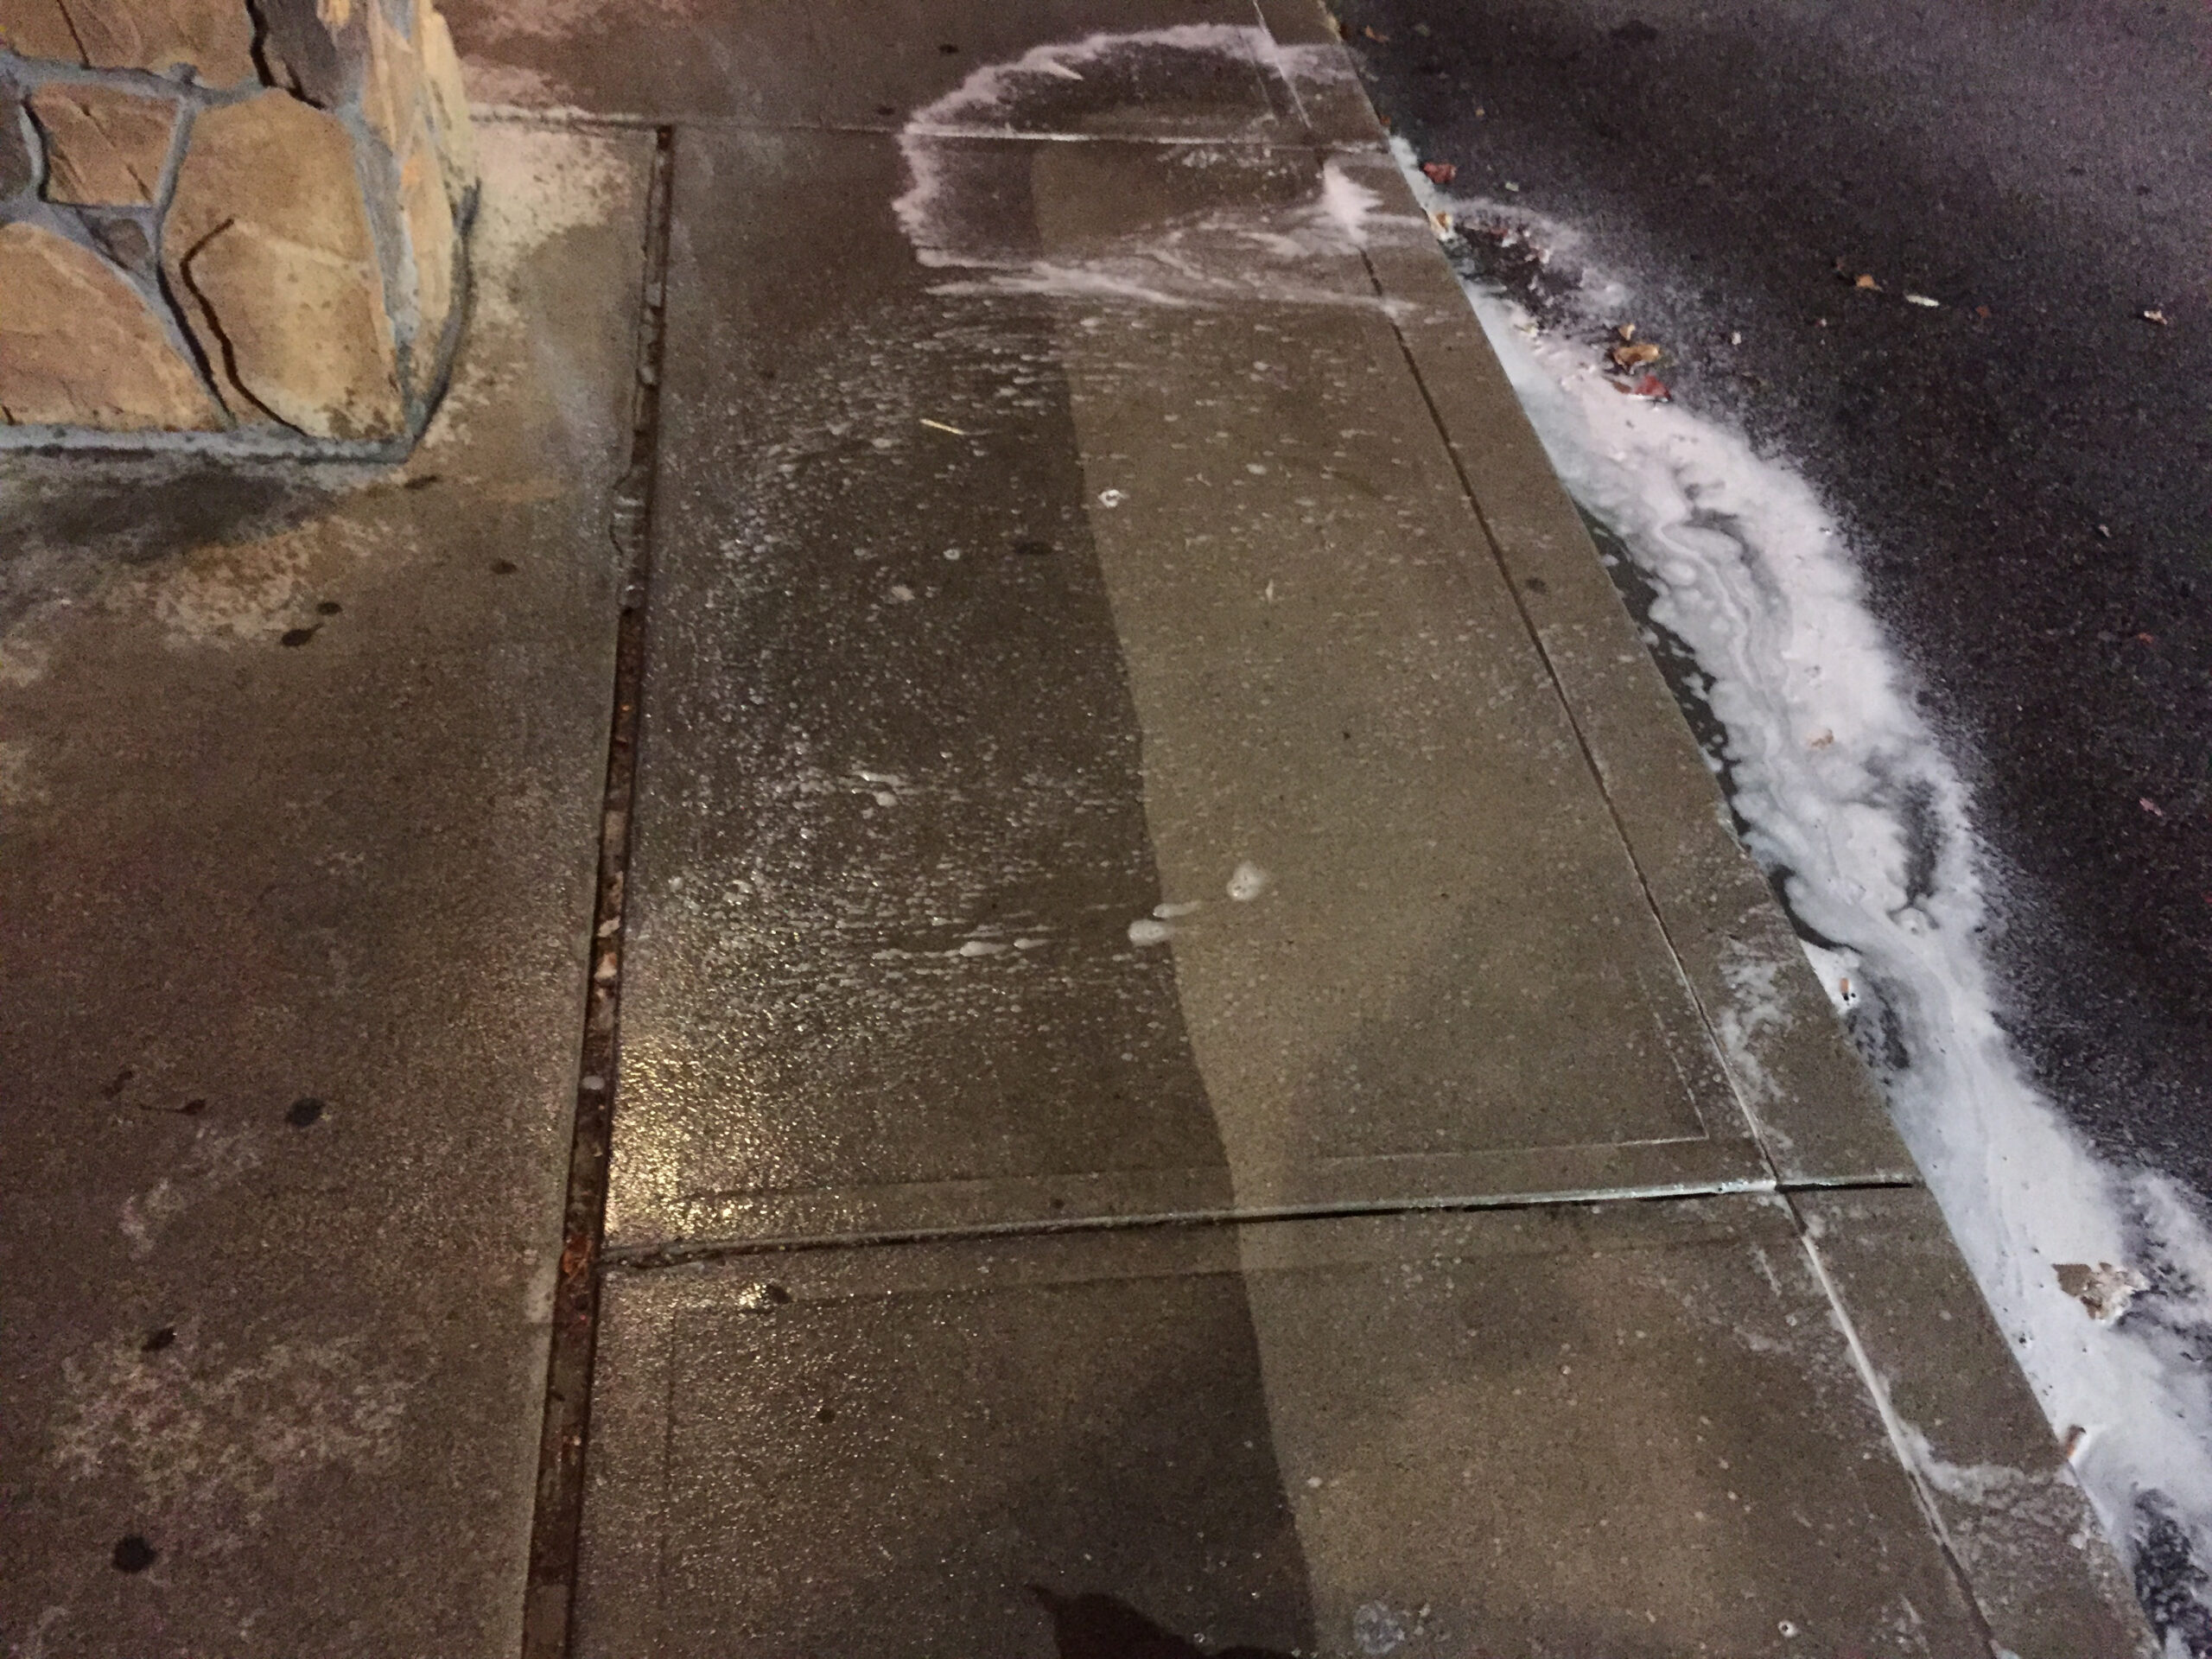 Photograph of the removal of concrete sidewalk stains